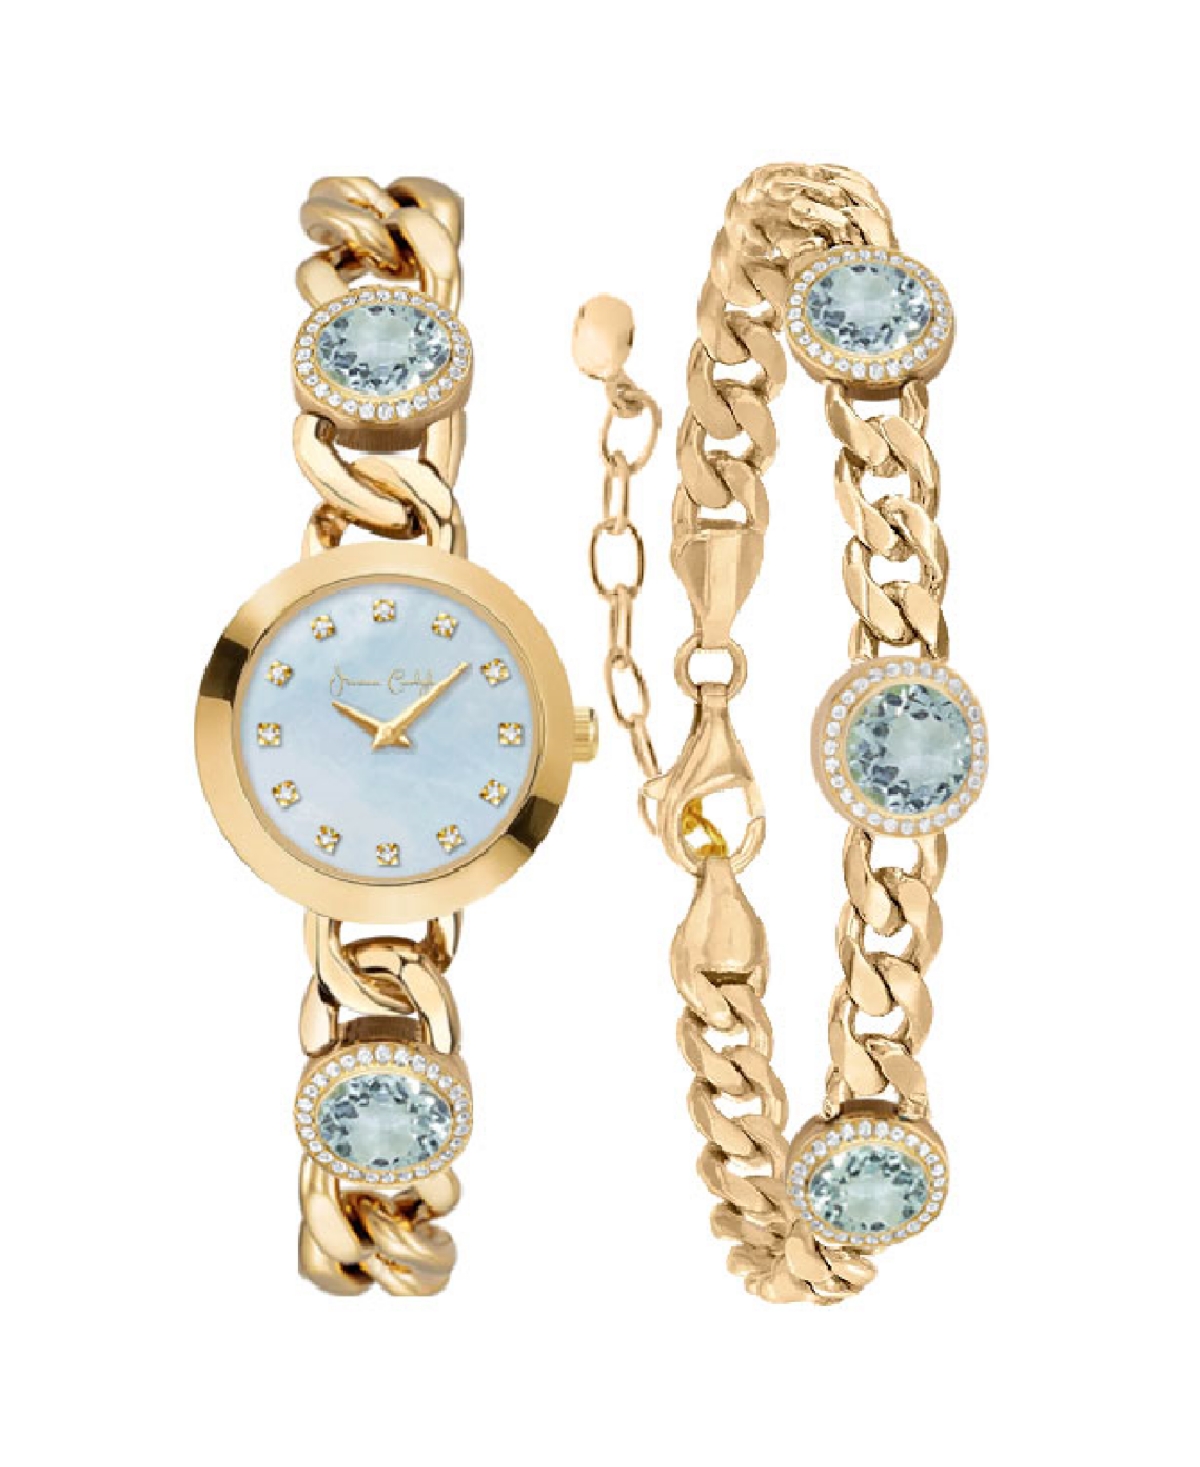 Jessica Carlyle Women's Quartz Gold-tone Alloy Watch 22.55mm Gift Set In Shiny Gold,light Blue Mother Of Pearl